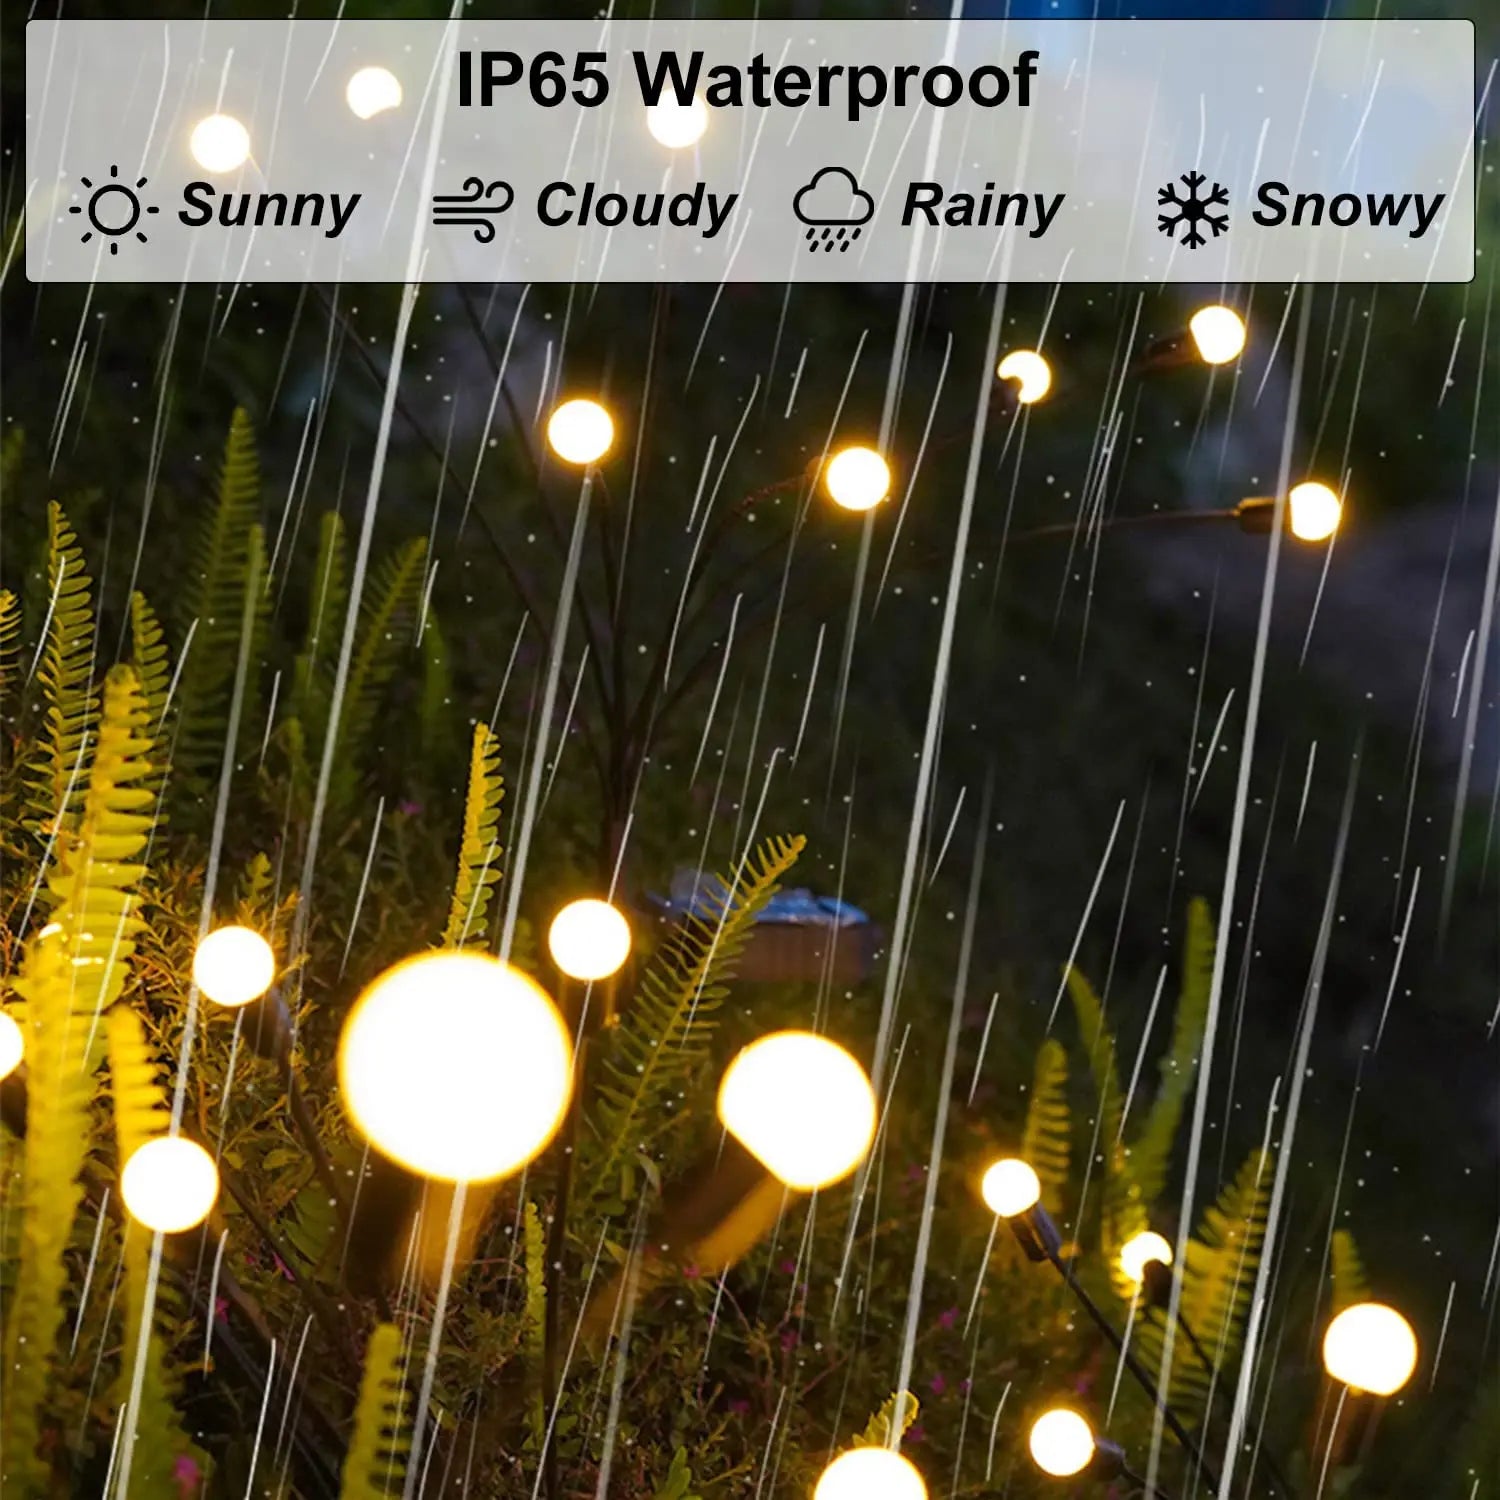 8Pack Solar Firefly Light, Waterproof for use in rain, snow, cloudy or sunny conditions (IP65 rating)